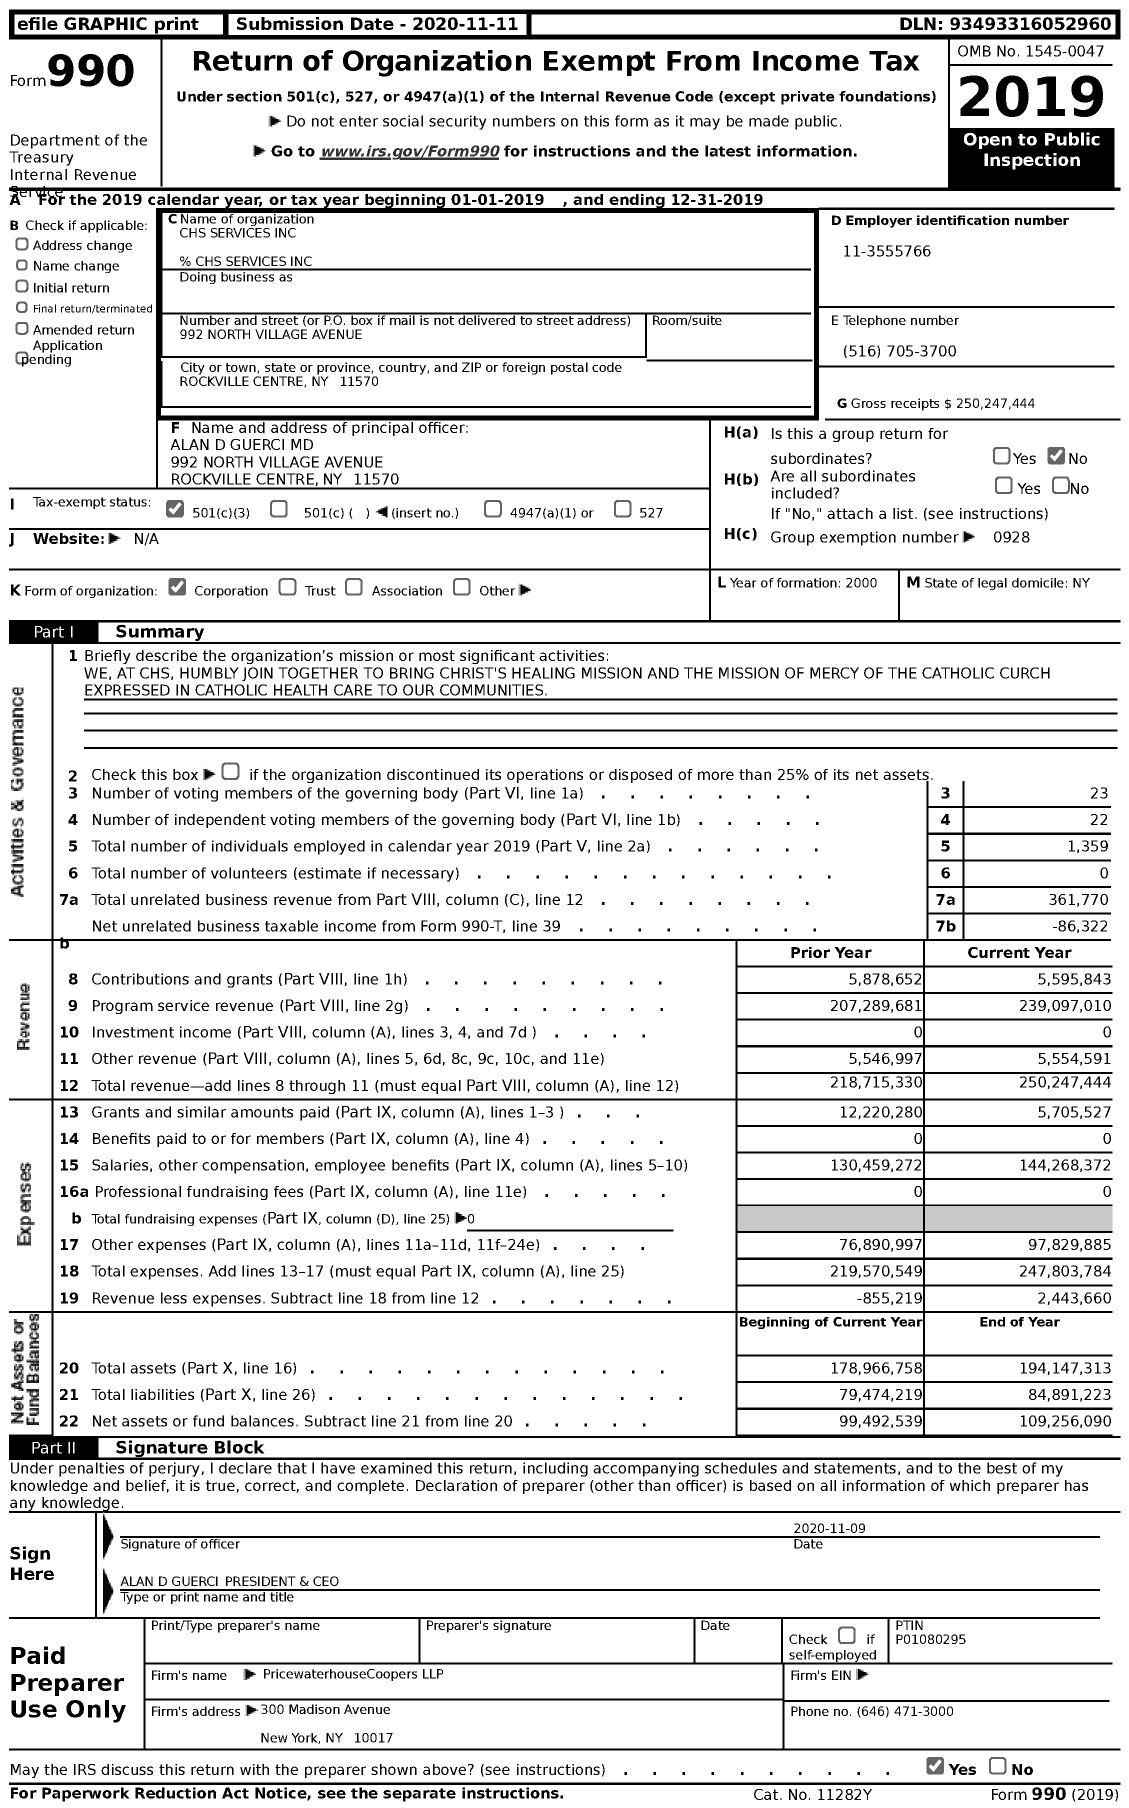 Image of first page of 2019 Form 990 for Catholic Health Services of Long Island (CHS)